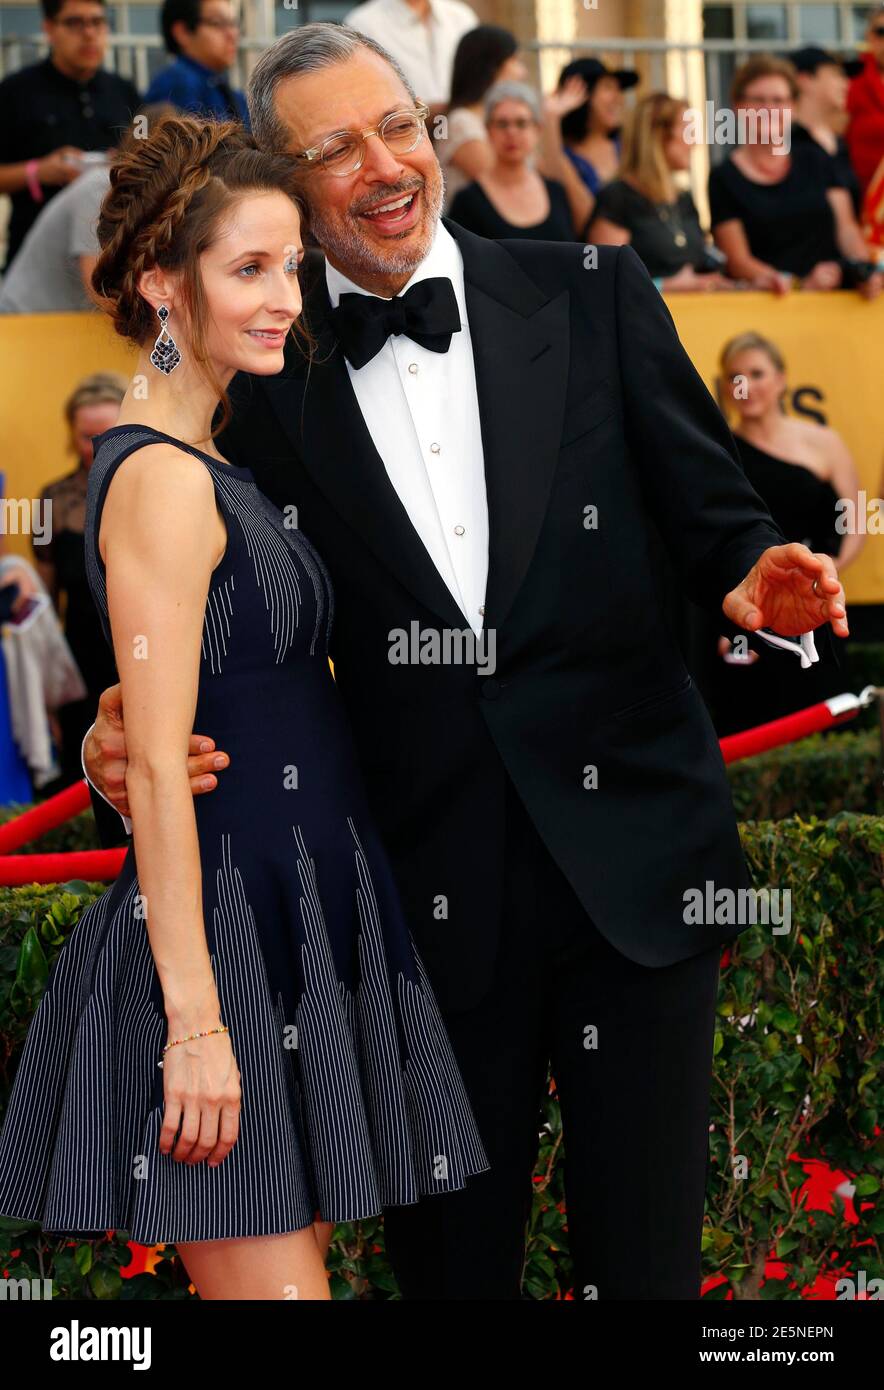 Actor Jeff Goldblum and his wife Emilie Livingston arrive at the 21st annual Screen Actors Guild Awards in Los Angeles, California January 25, 2015.    REUTERS/Mike Blake (UNITED STATES  - Tags: ENTERTAINMENT)   (SAGAWARDS- ARRIVALS) Stock Photo